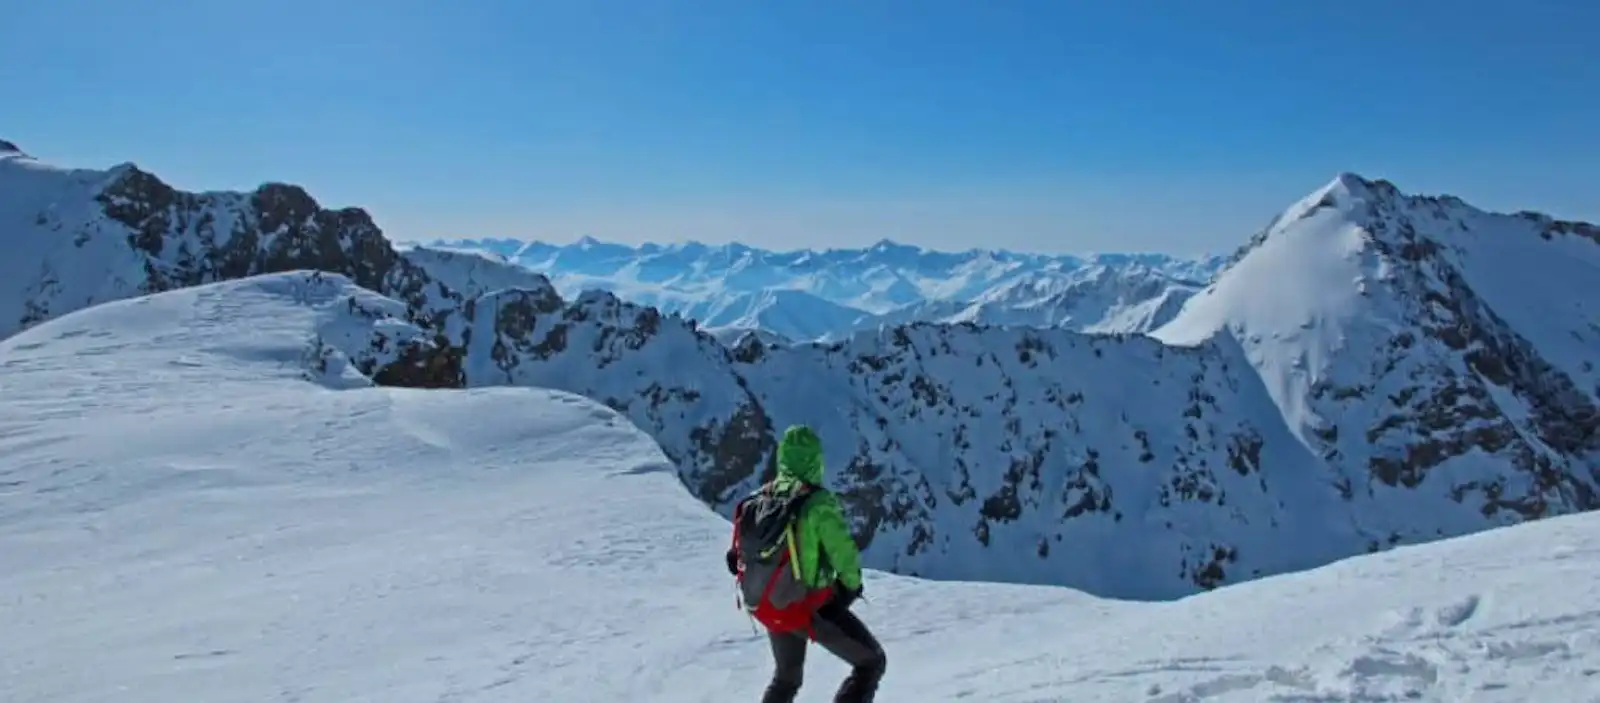 Ski Touring in Kyrgyzstan: What are the Best Spots? post image